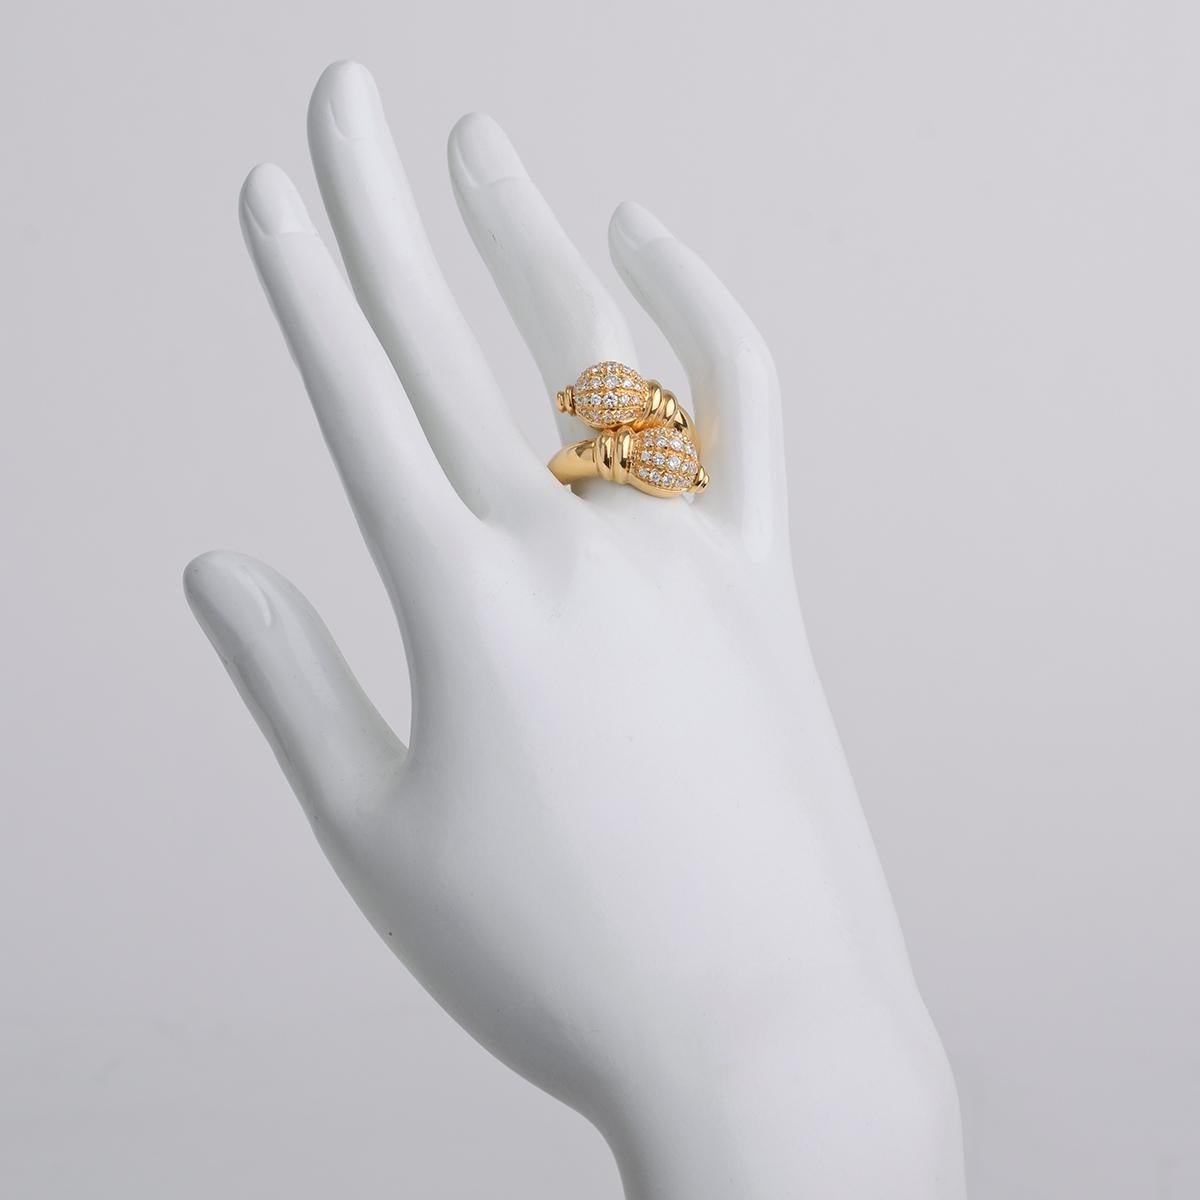 This classically styled 18k yellow gold ring wraps around the finger and ends with two, side-by-side incised globe-shaped finials set with pavé diamonds.
 
Numbered 'B-2687767' and signed 'Boucheron'
Size 8
